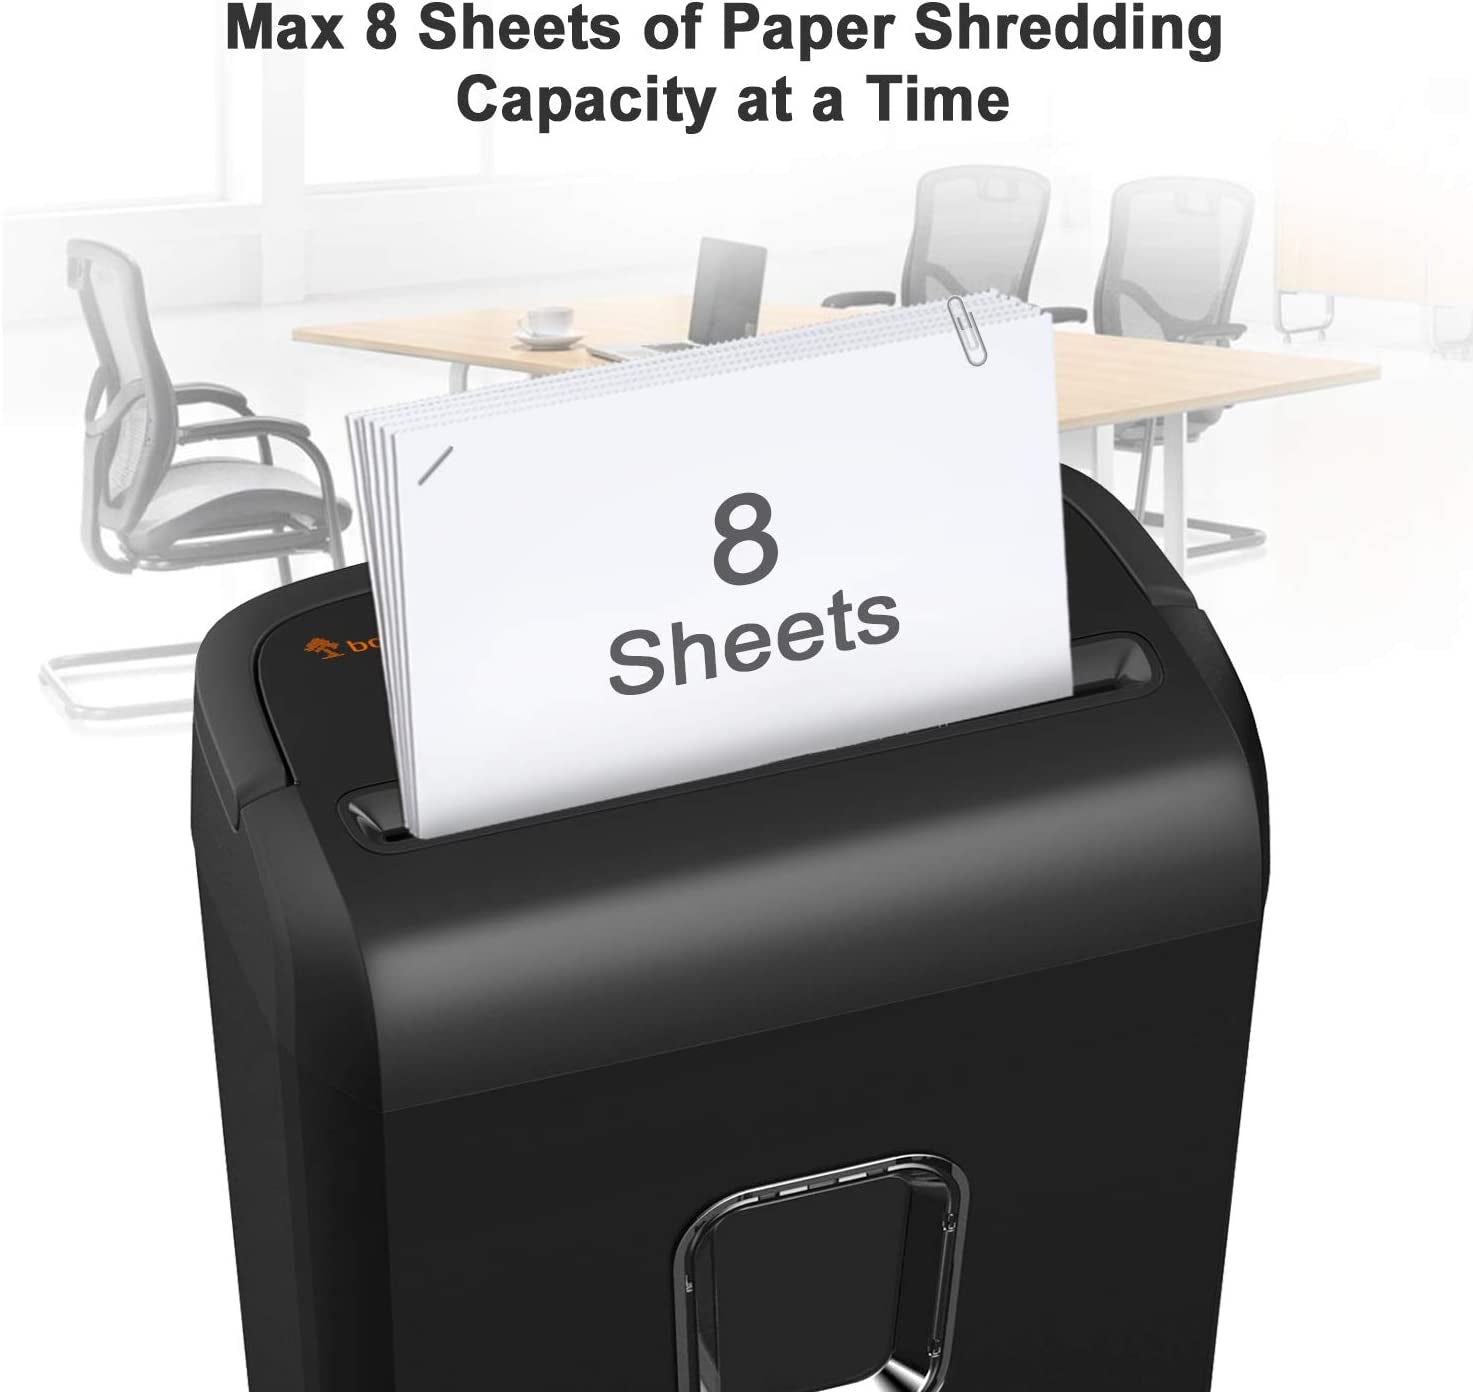 8-Sheet Cross Cut Shredder, P-4 High-Security Paper Shredder for Home & Small Office Use, Shreds Credit Cards/Staples/Clips, Portable Handle Design with 13-Litre Wastebasket, Black (C234-B)